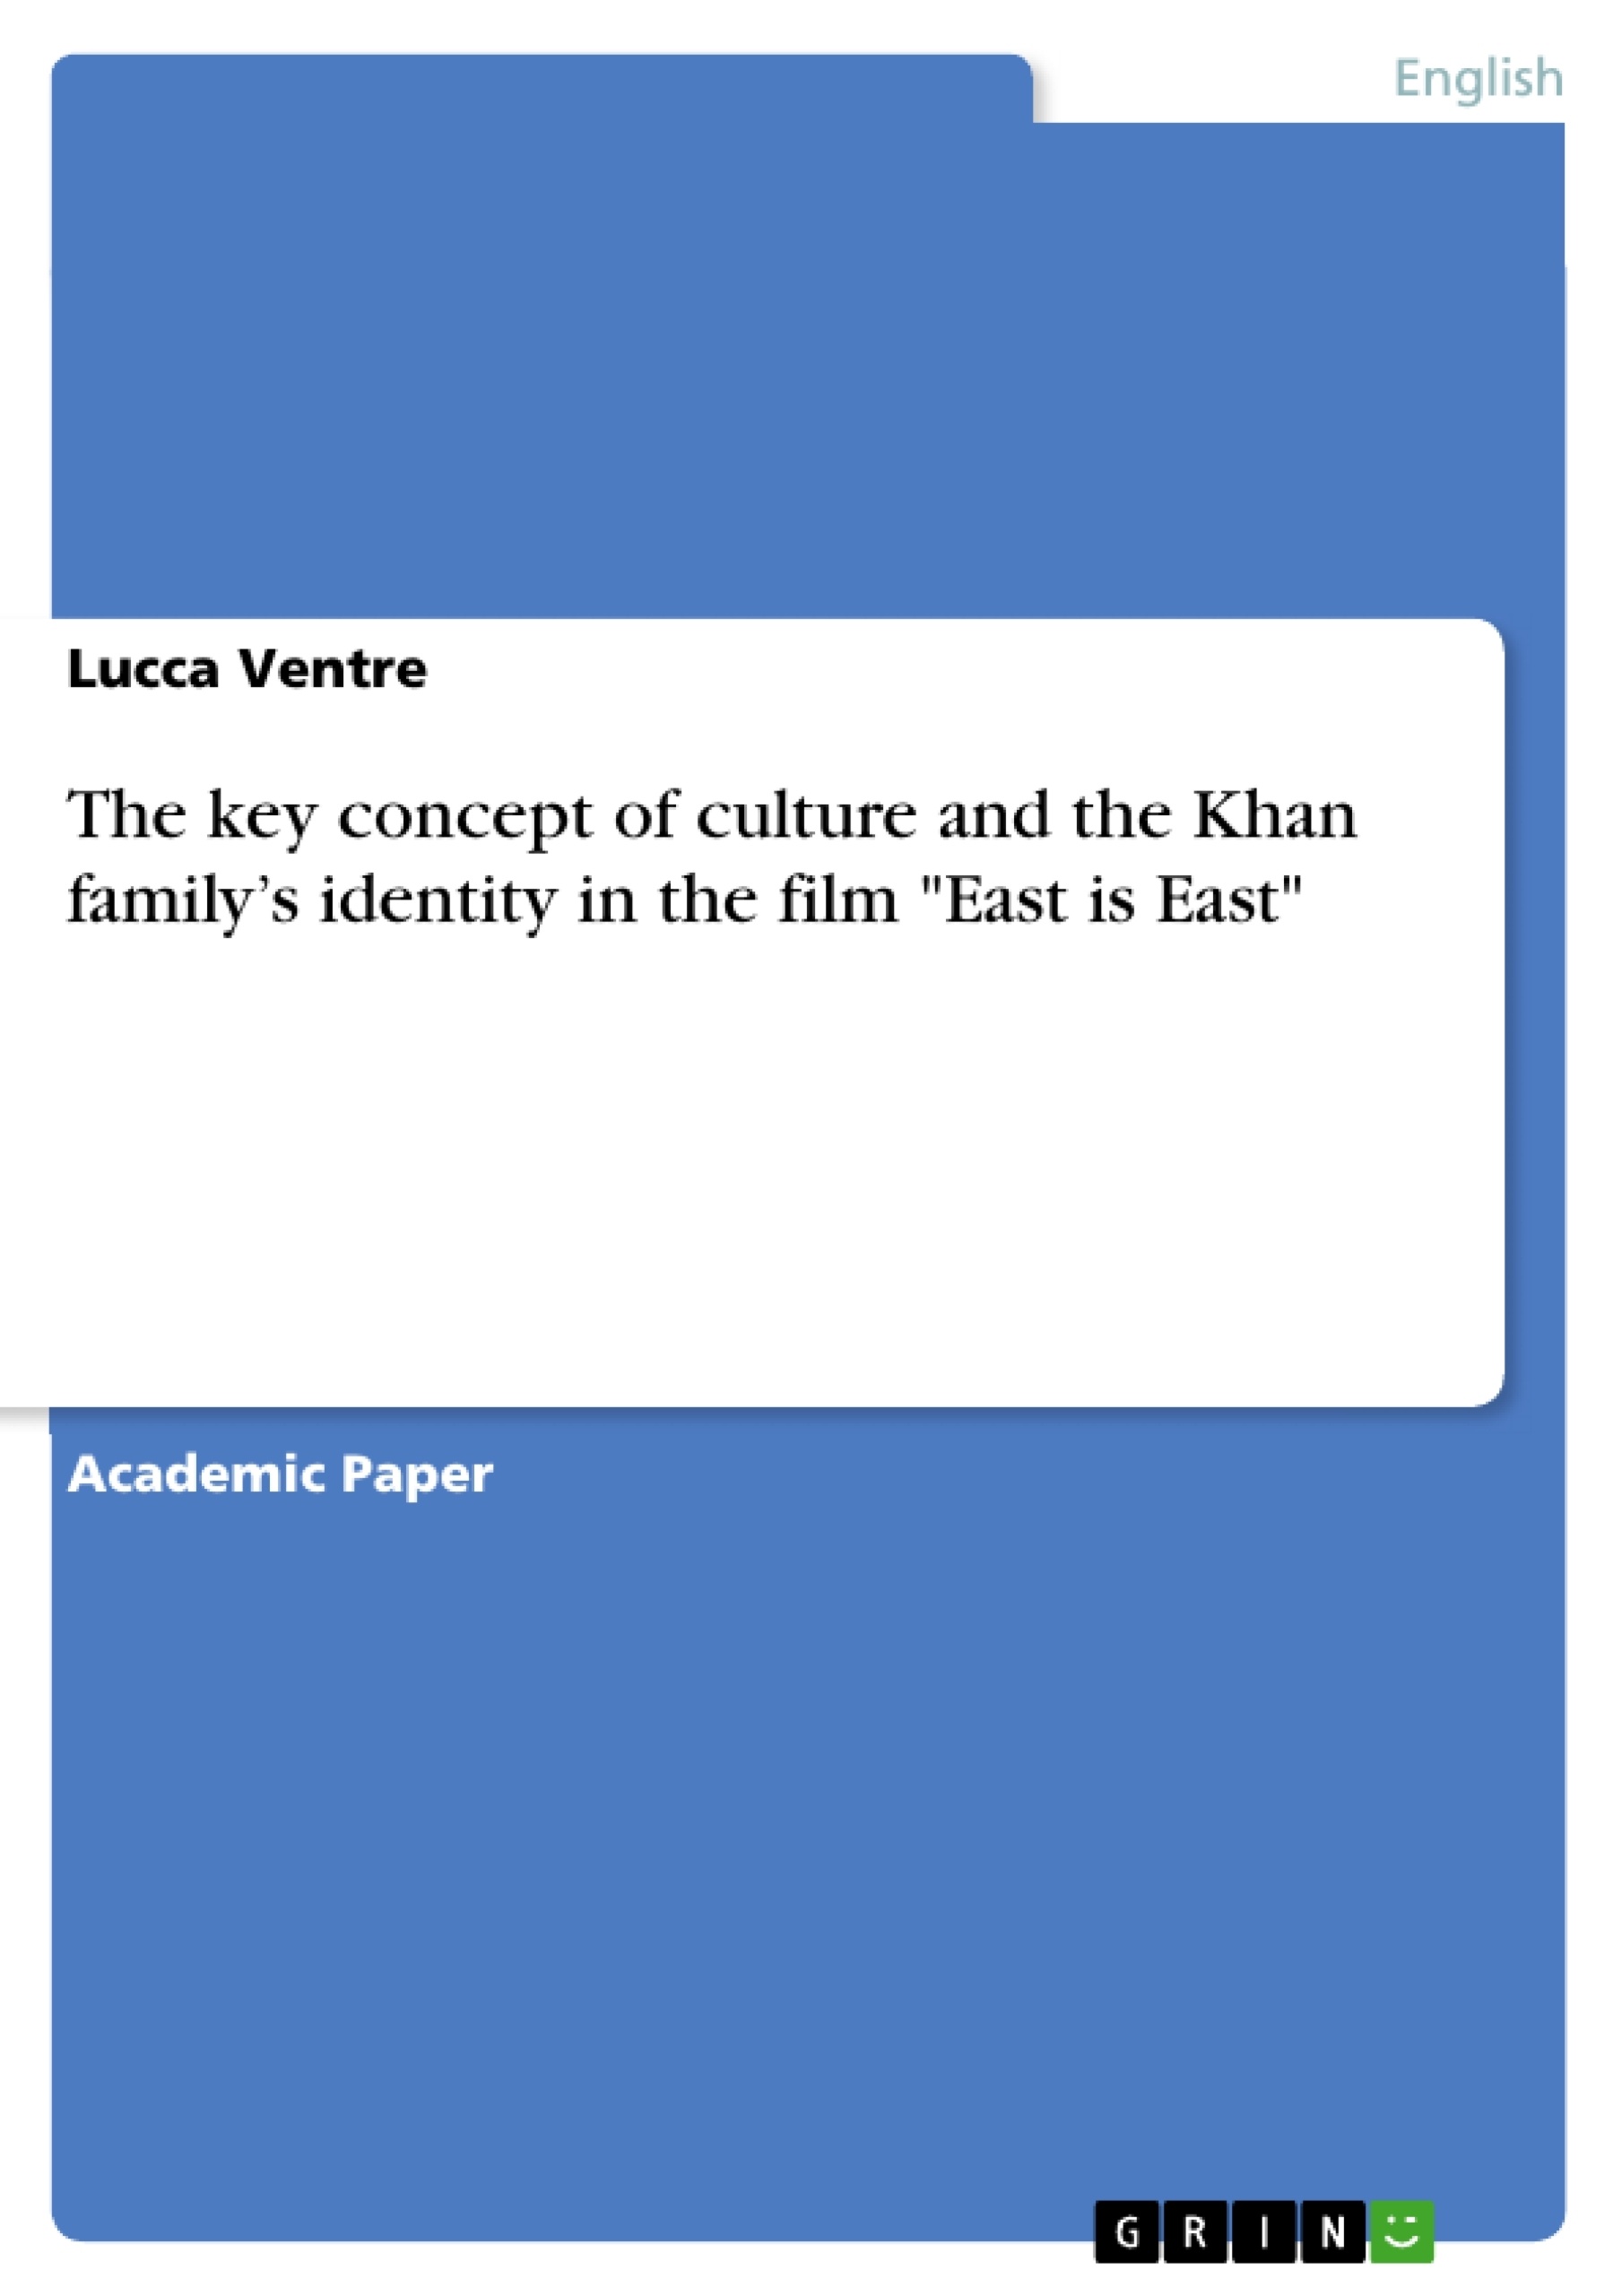 Title: The key concept of culture and the Khan family’s identity in the film "East is East"